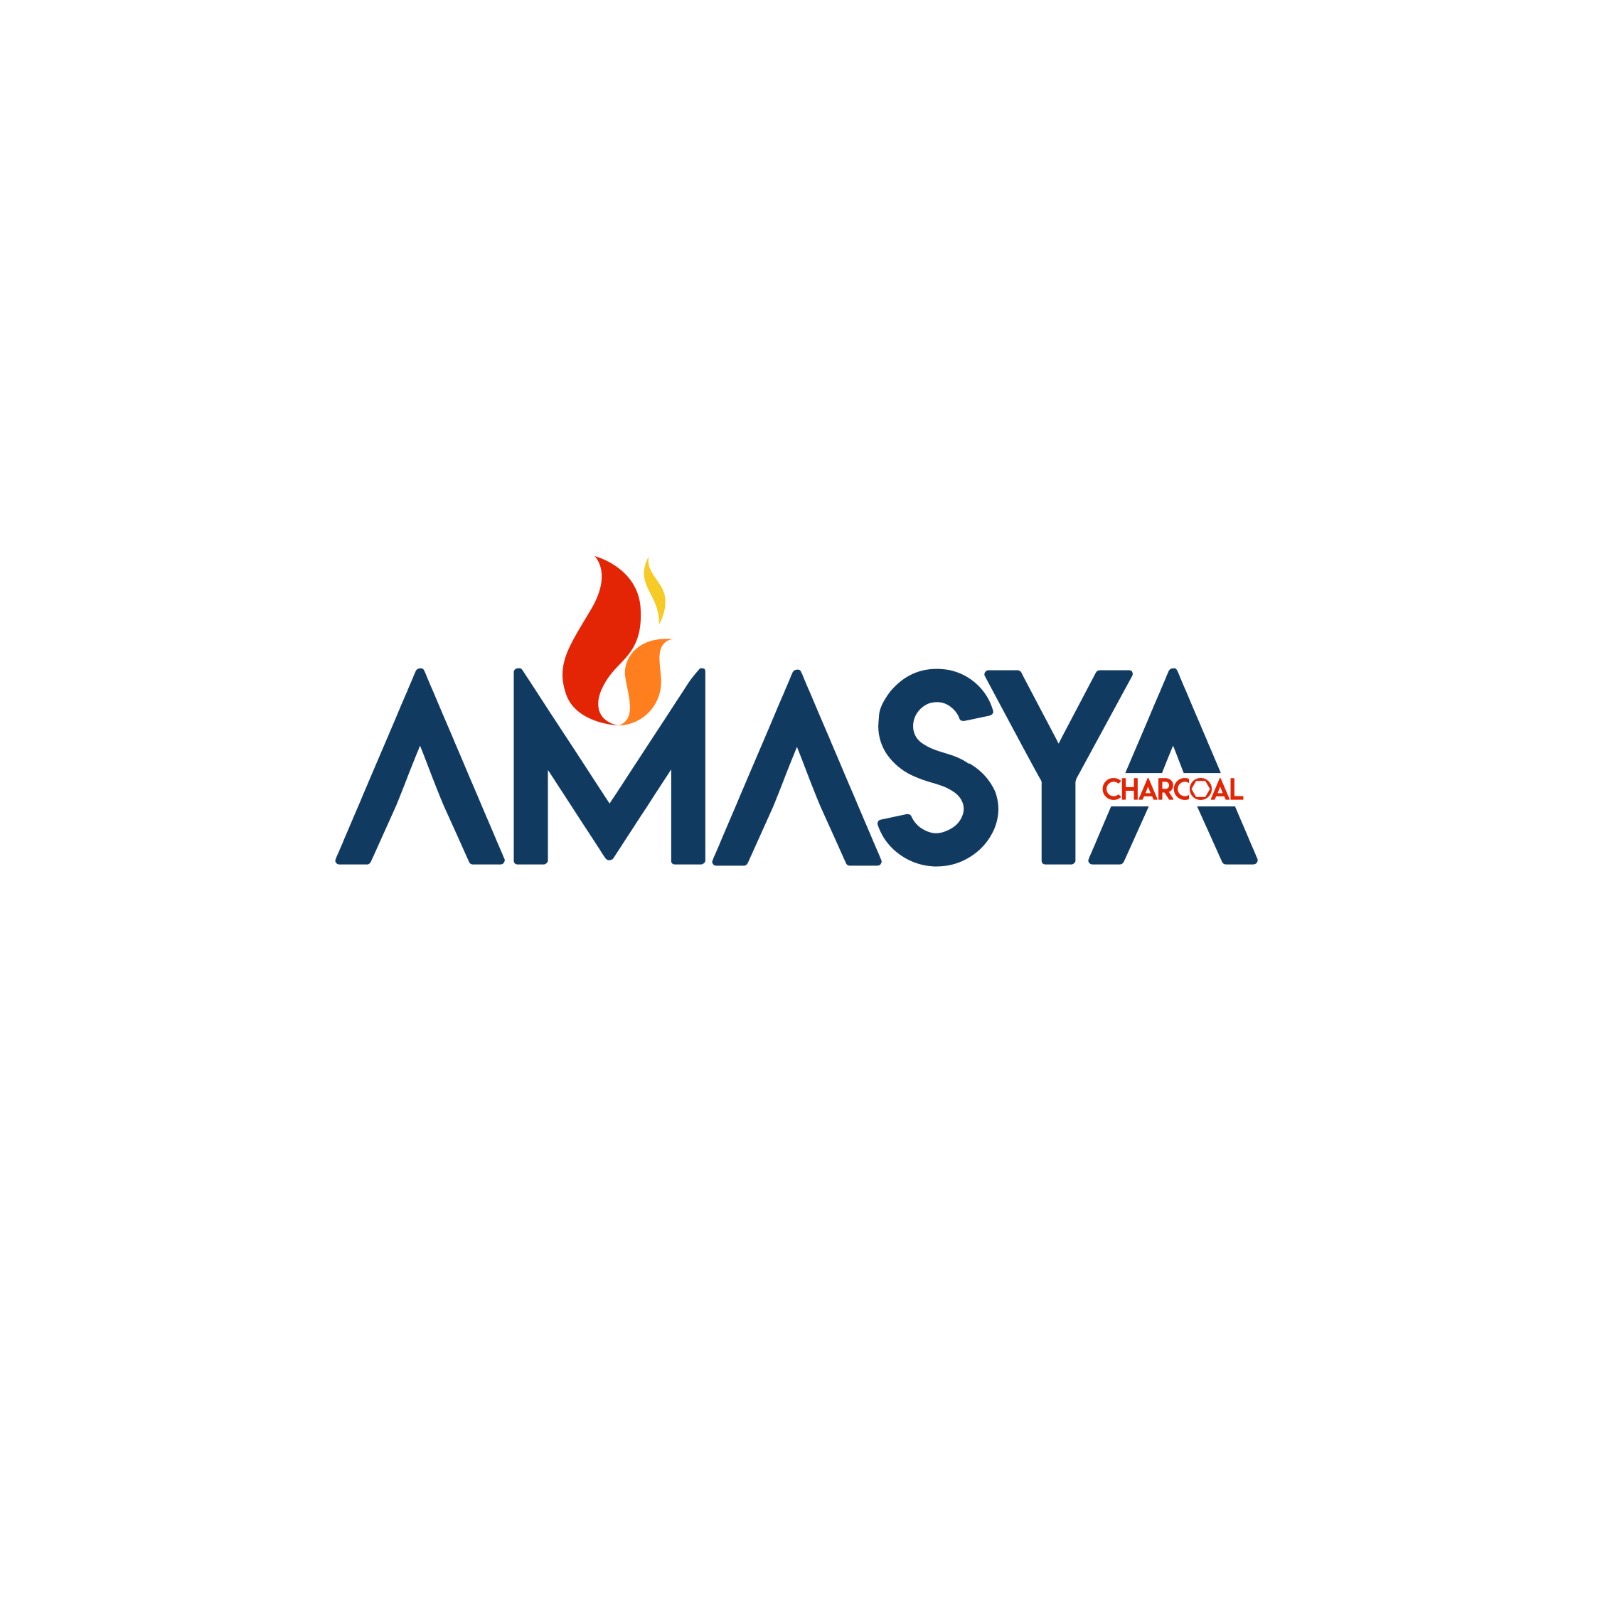 Amasya Industrial Investments Company